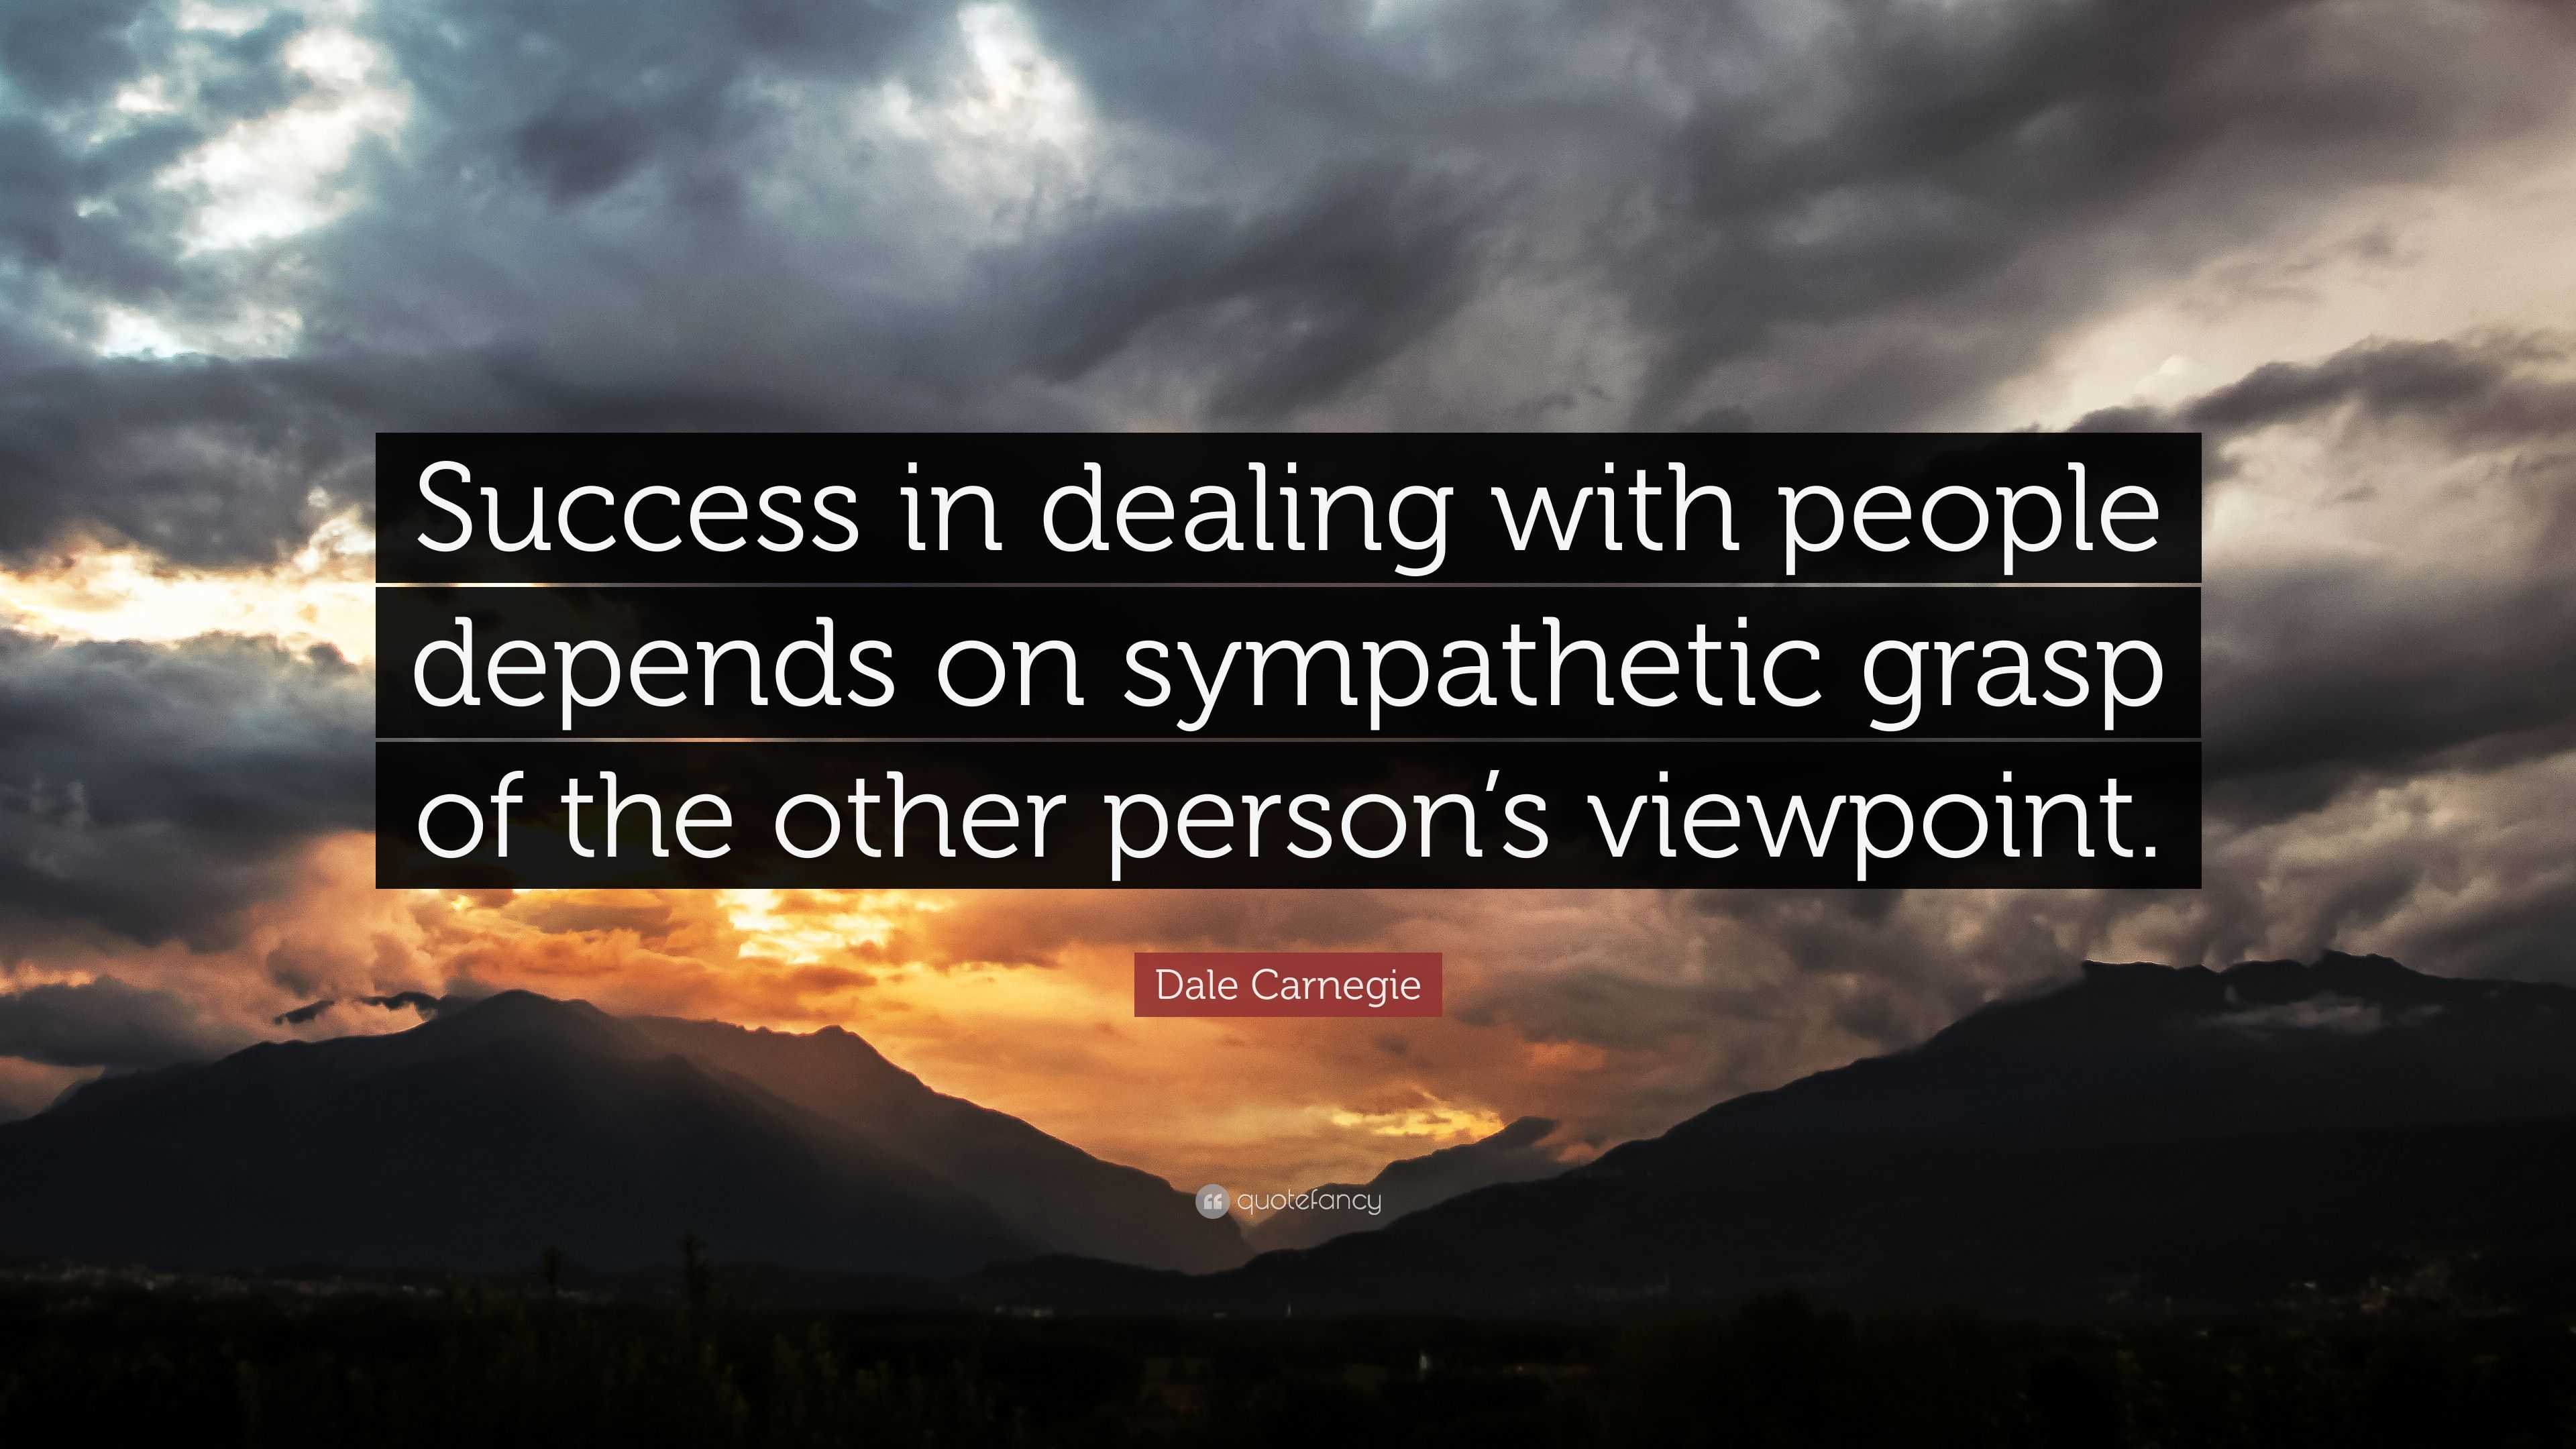 Dale Carnegie Quote: “Success in dealing with people depends on